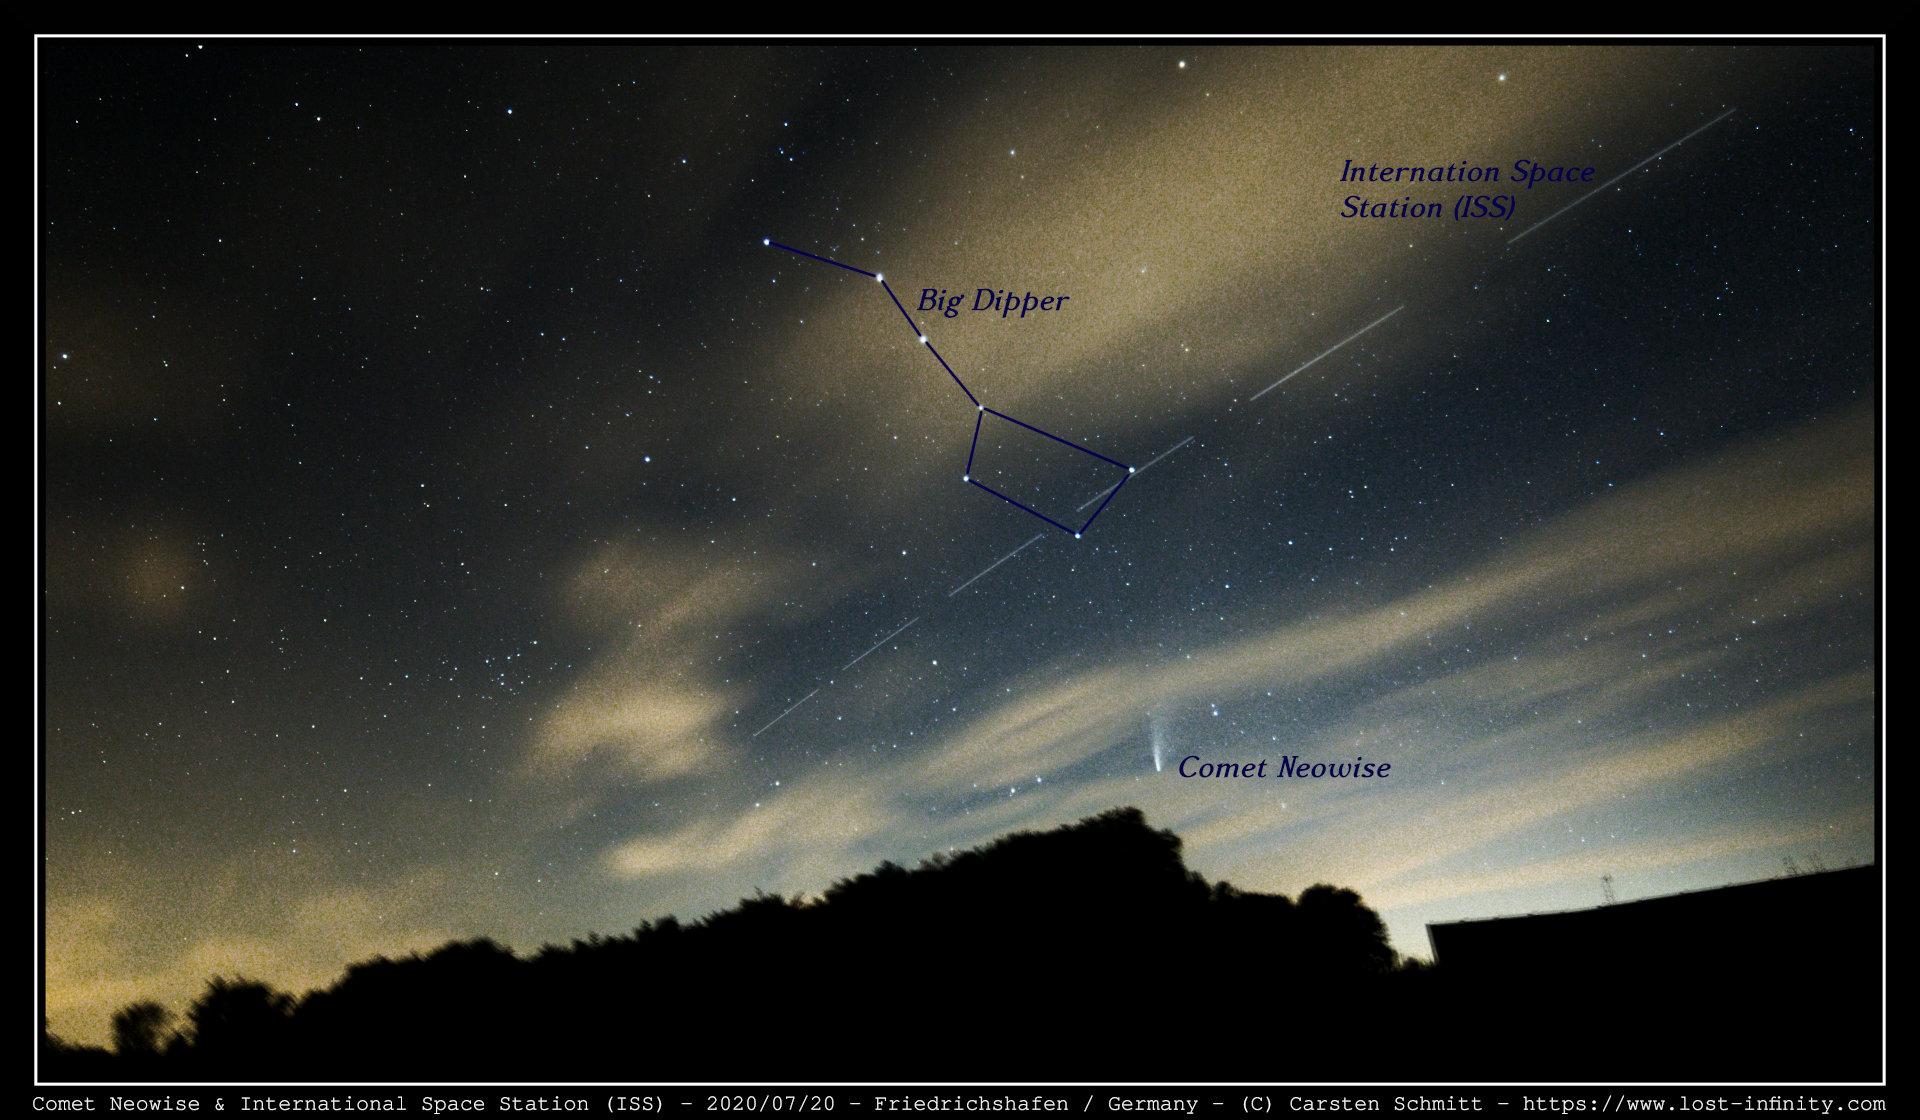 Comet Neowise & Inernational Space Station (ISS) in front of Big Dipper - 2020/07/20